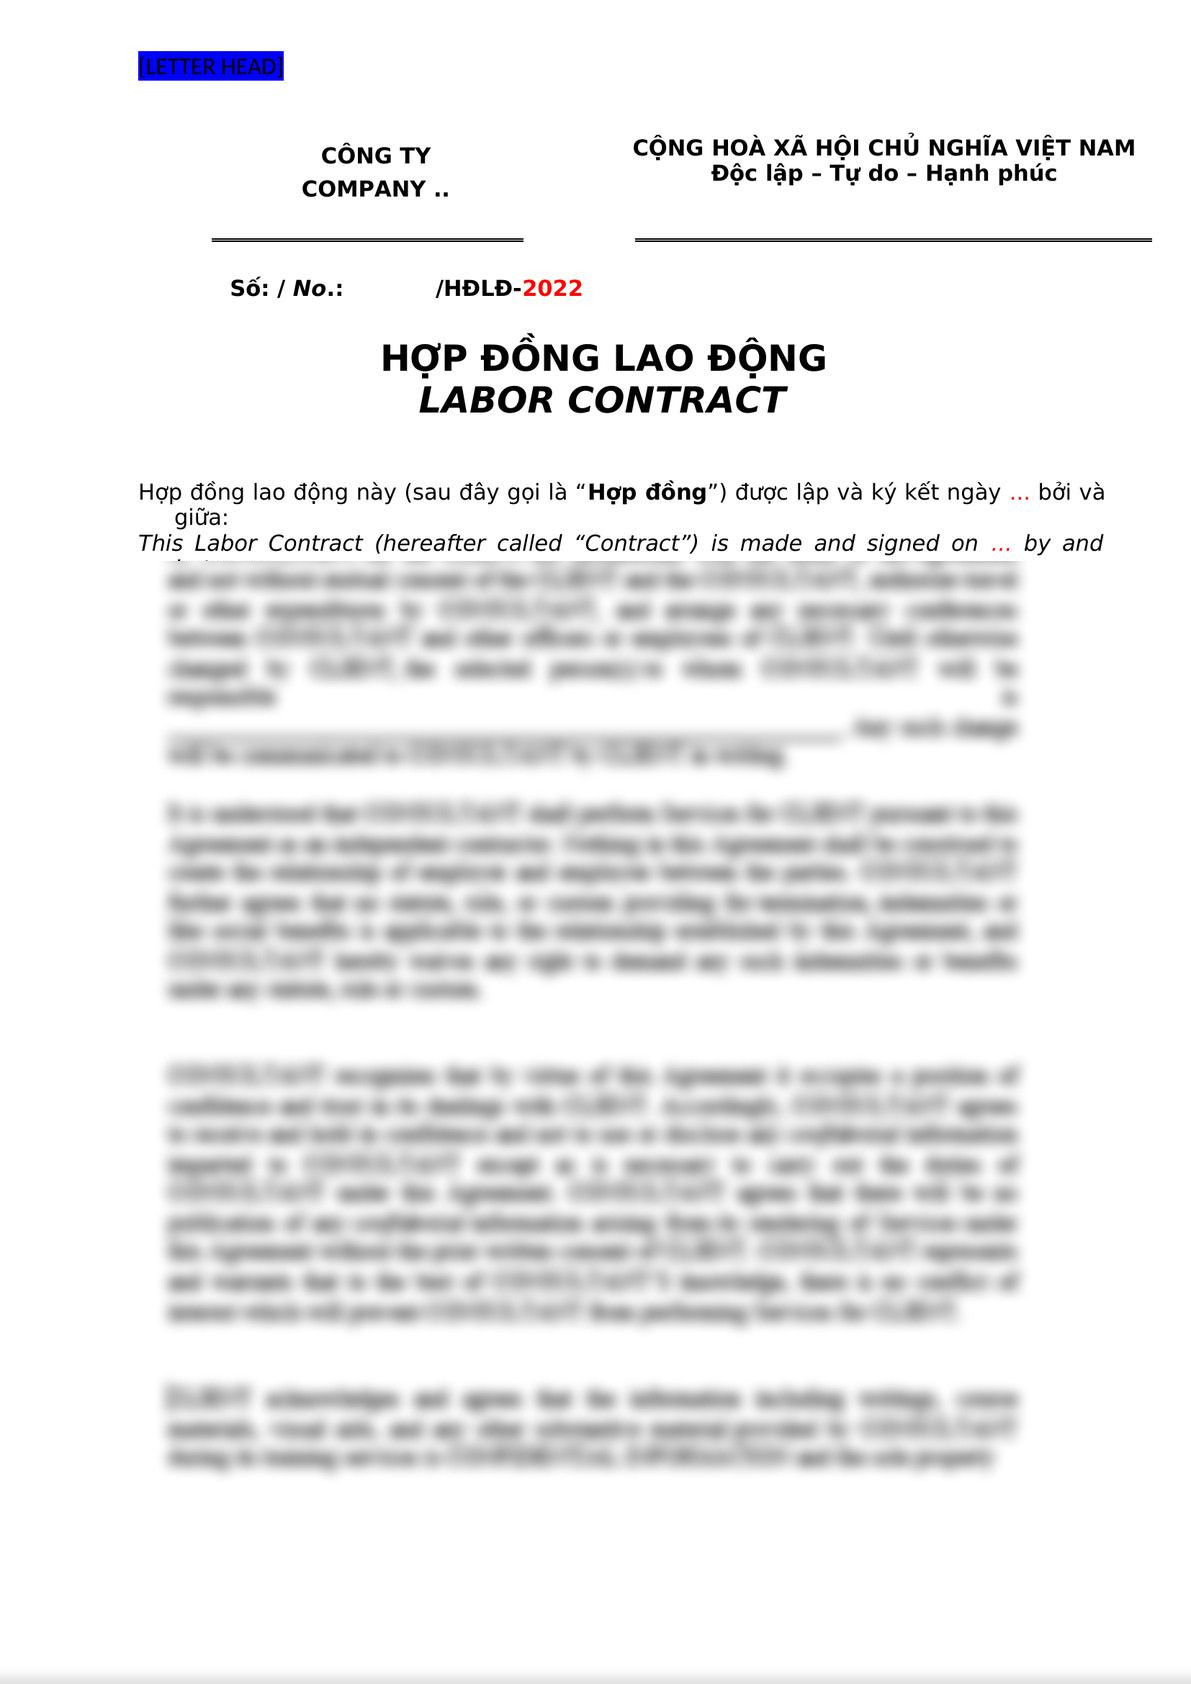 [LawPlus] Labor contract - Hop dong lao dong-0